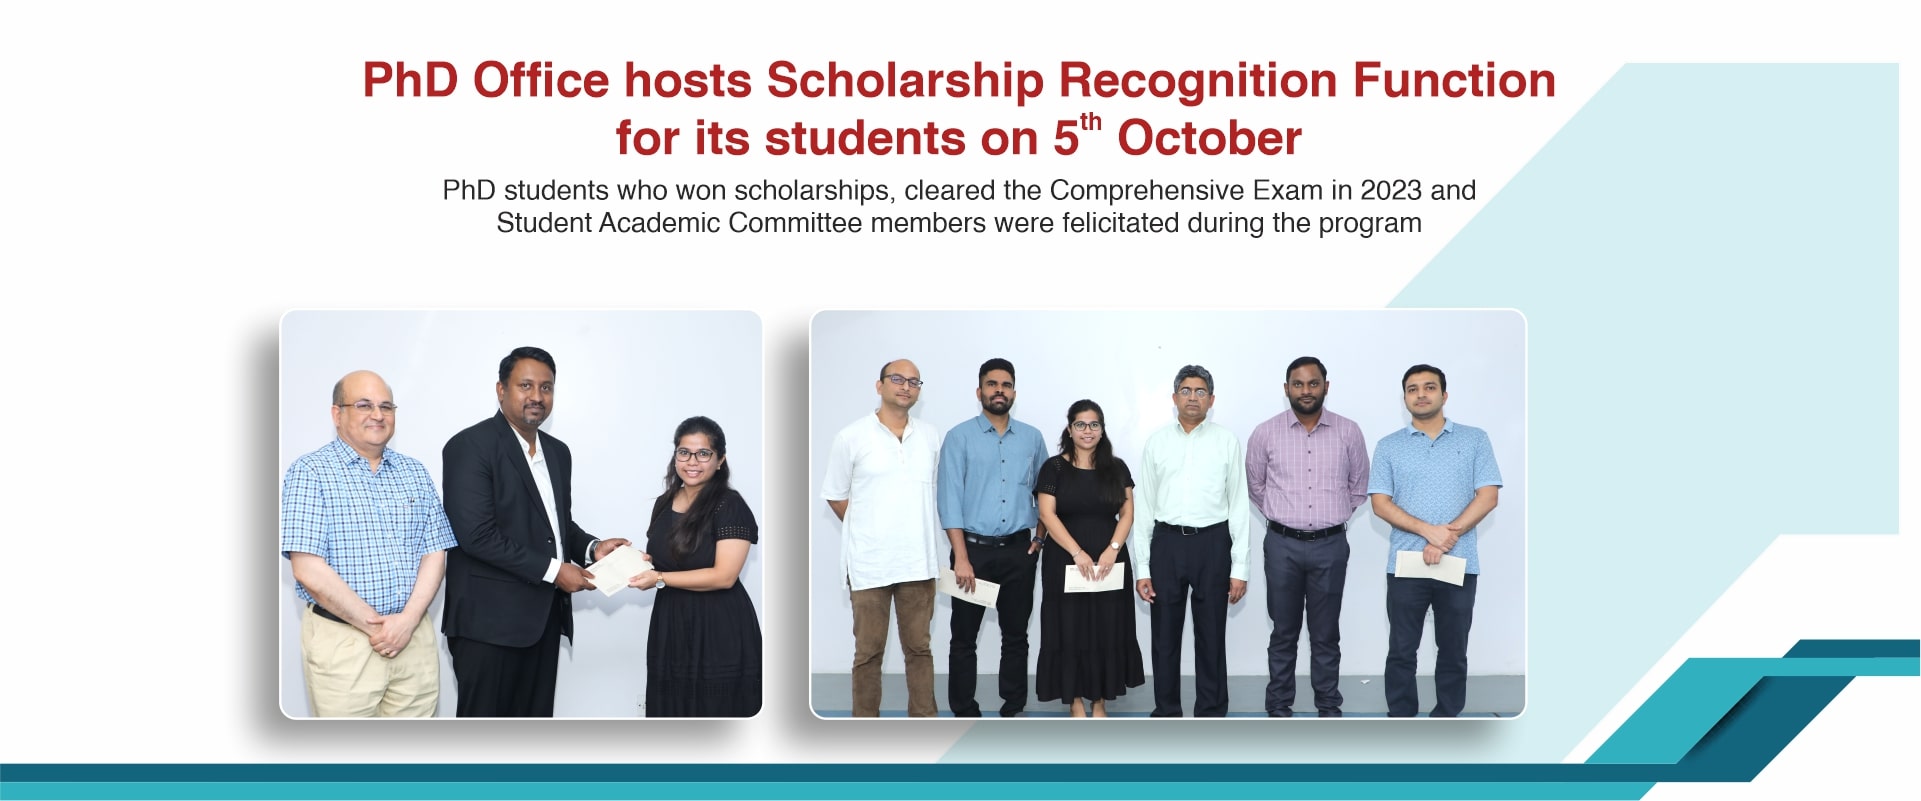 PhD Office hosts Scholarship Recognition Function for its students on 5th October